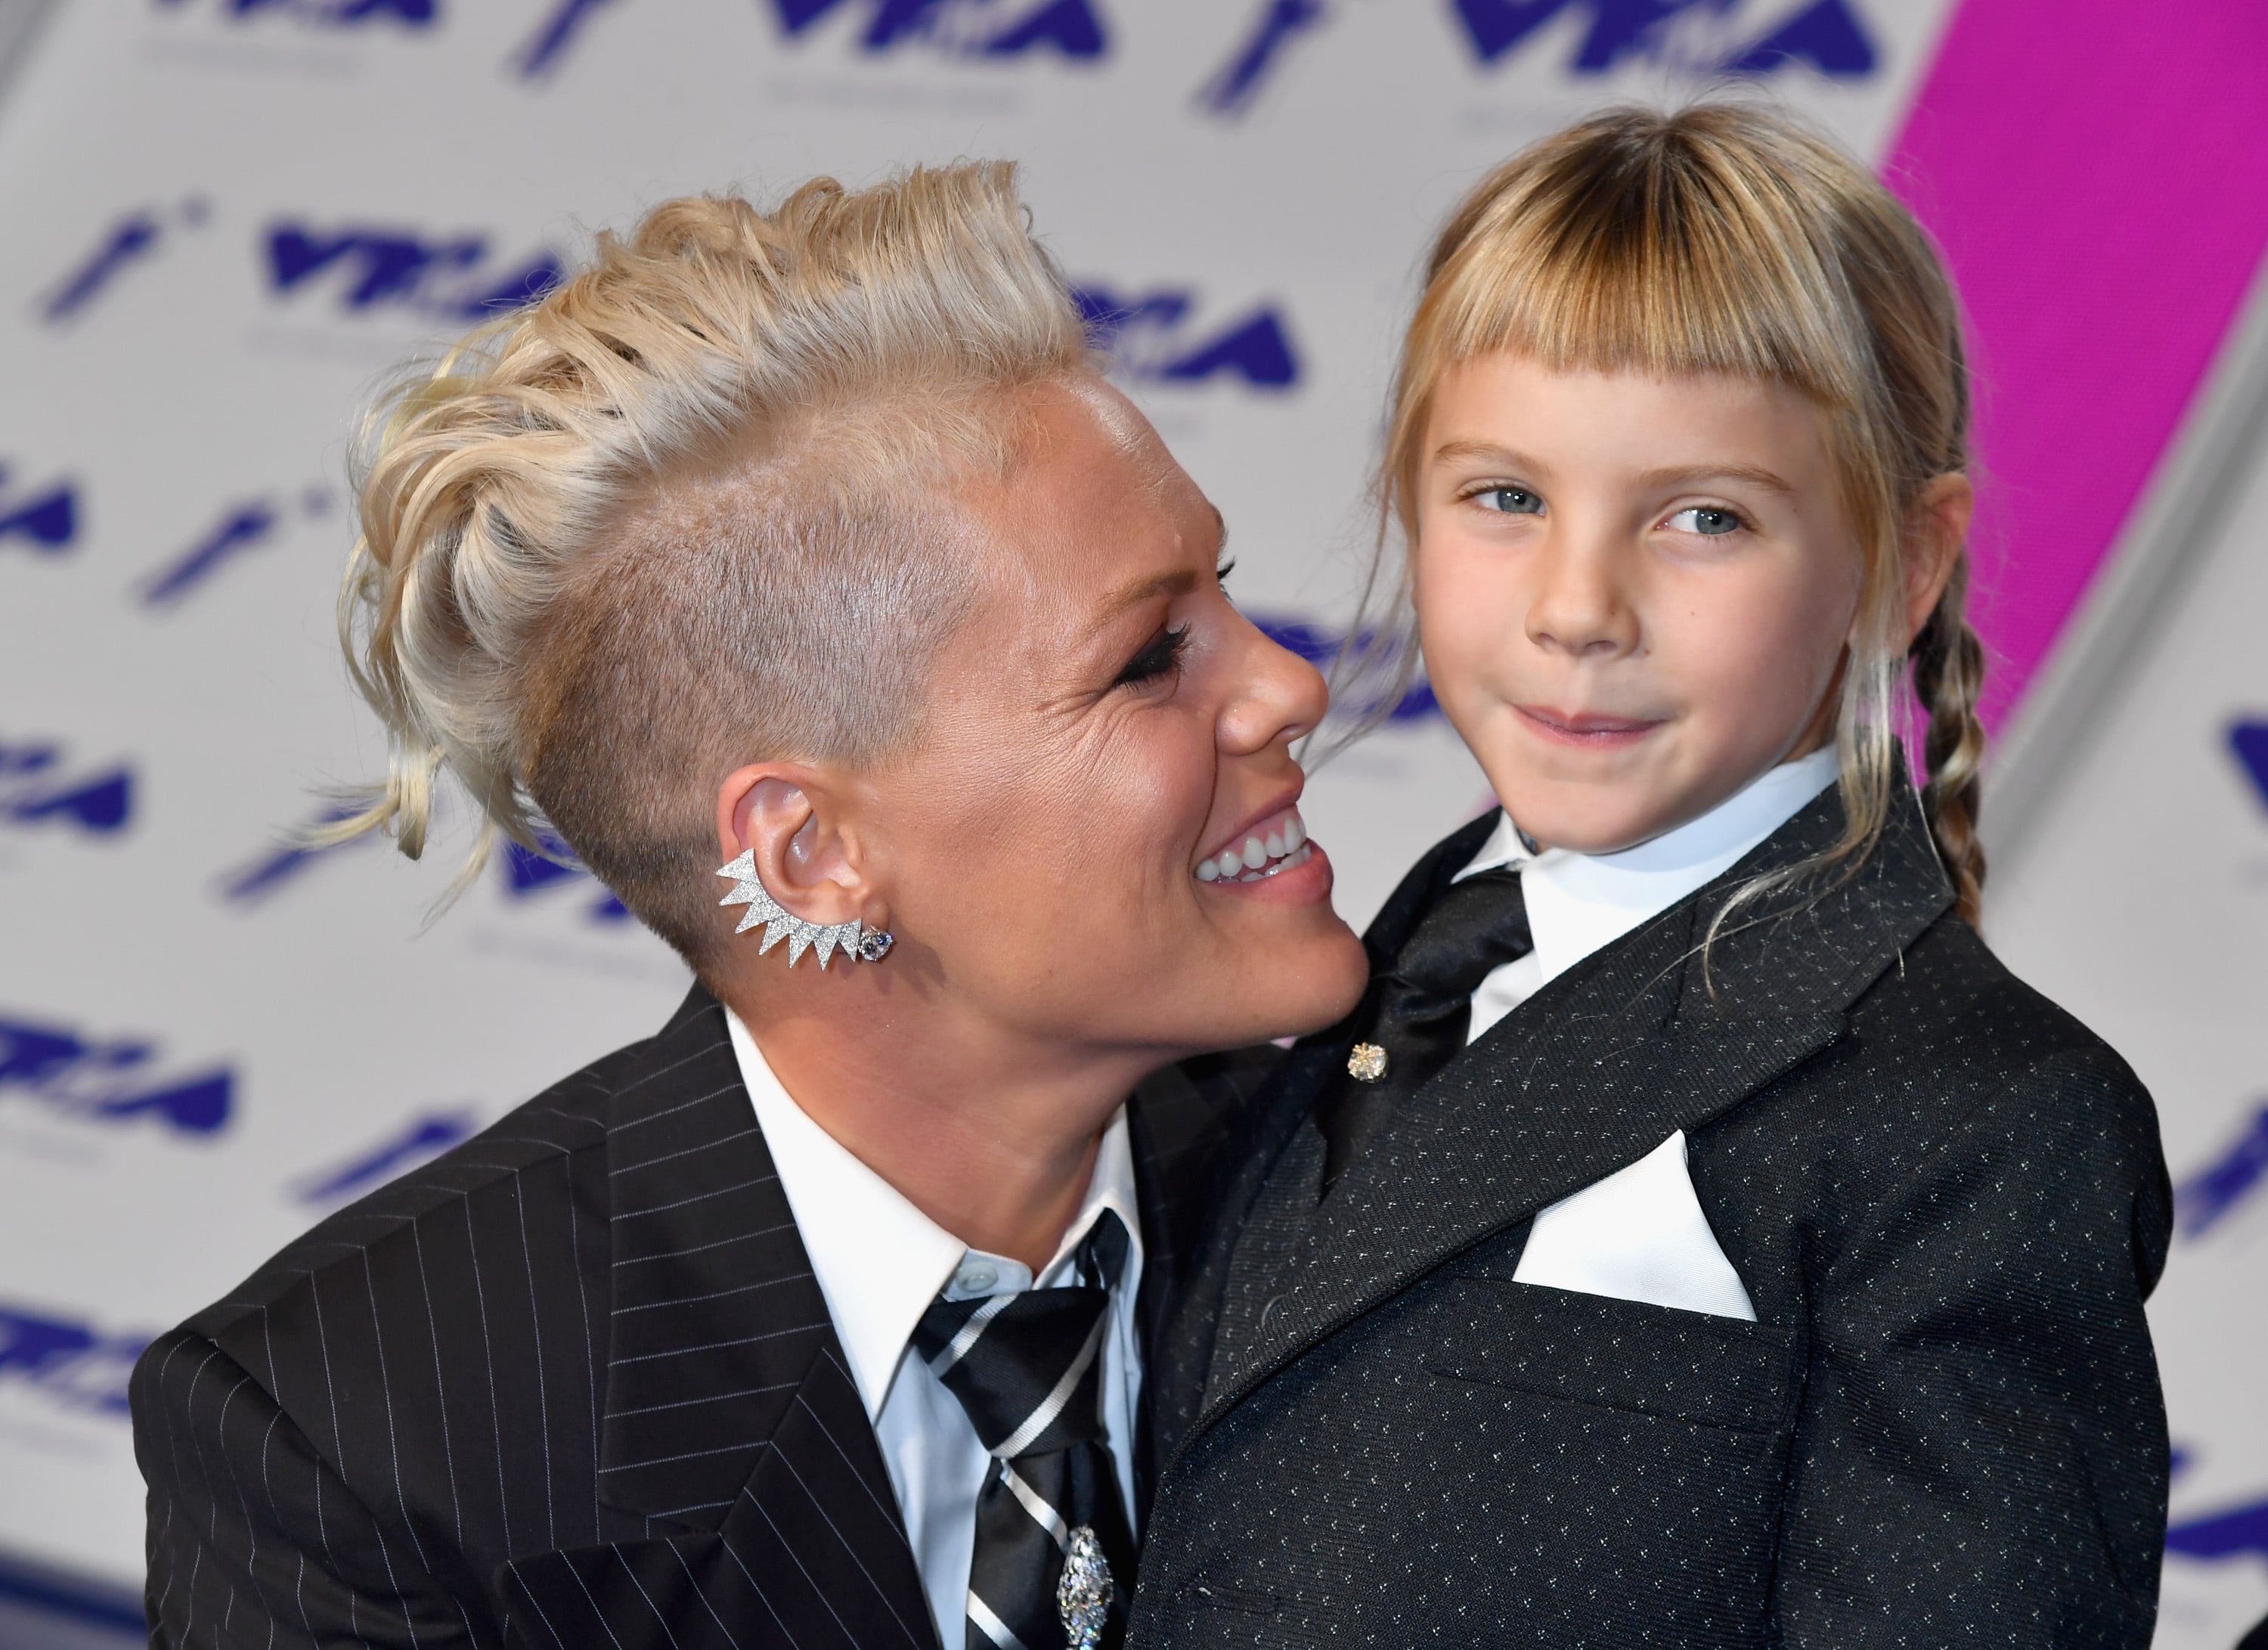 Pink's Daughter Willow, 12, Debuts New Buzzcut on Mom's Australia Tour